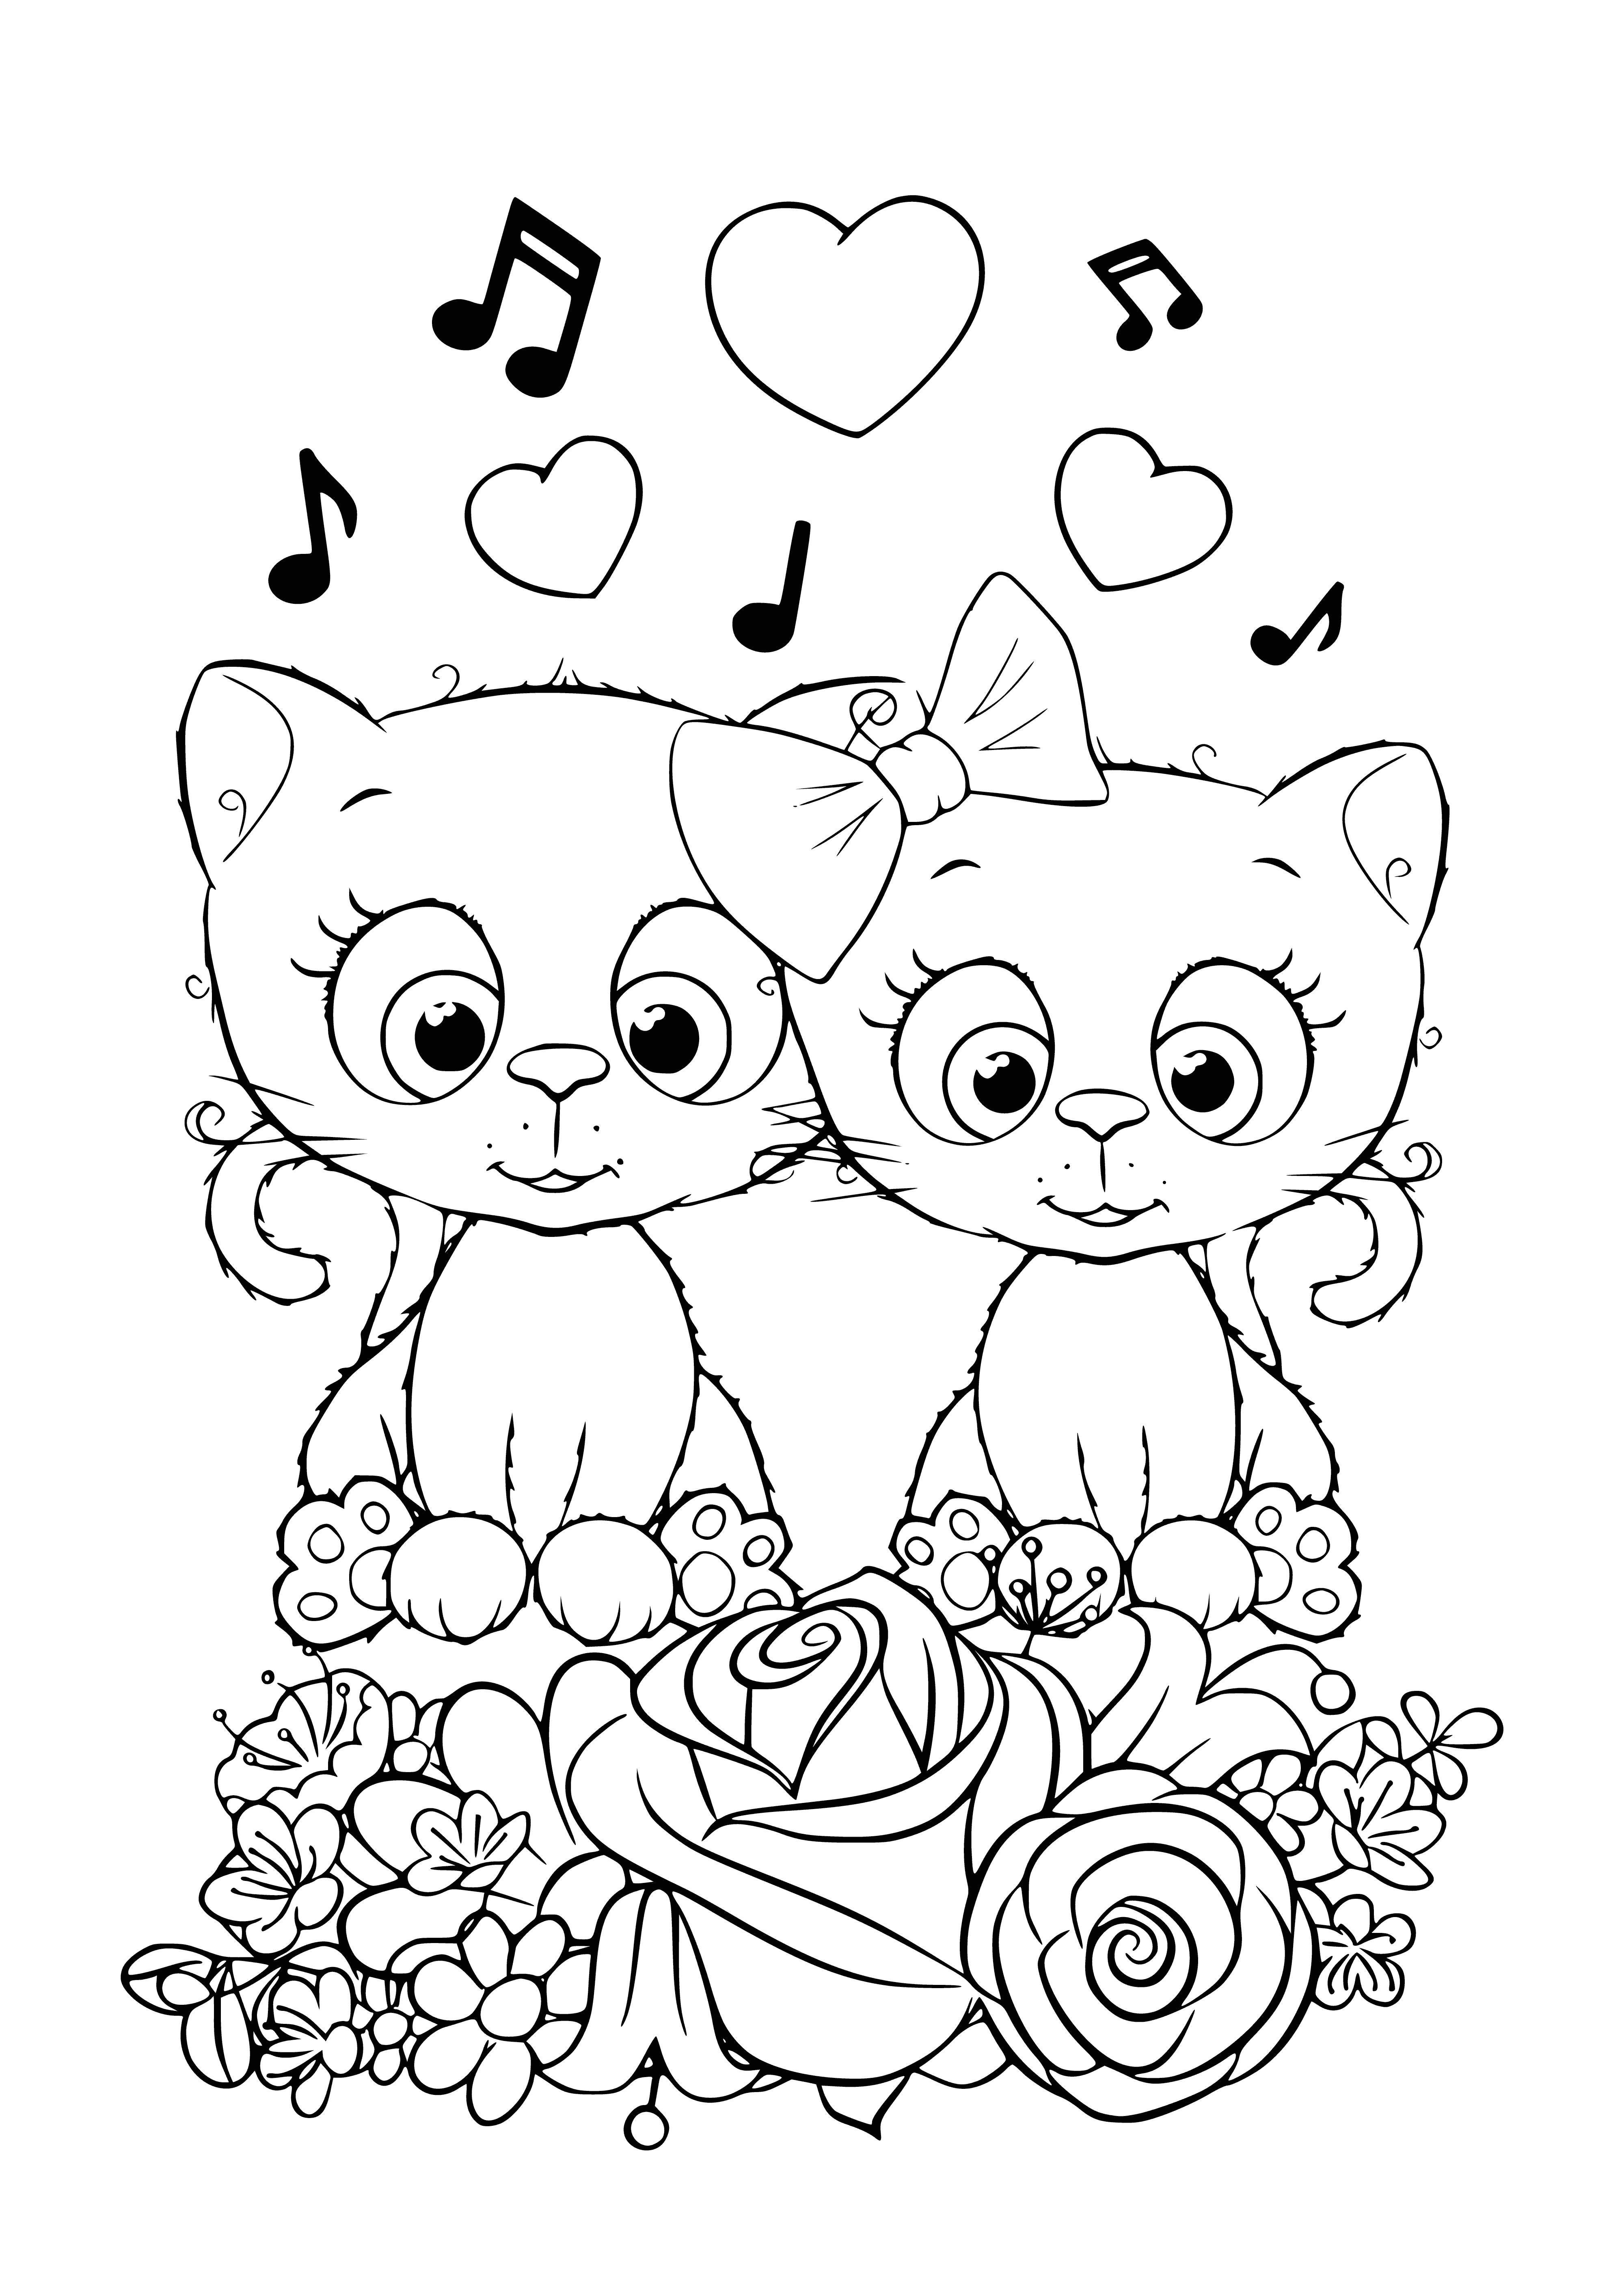 coloring page: Three sleeping kittens: grey & white, black & white, and brown & white.